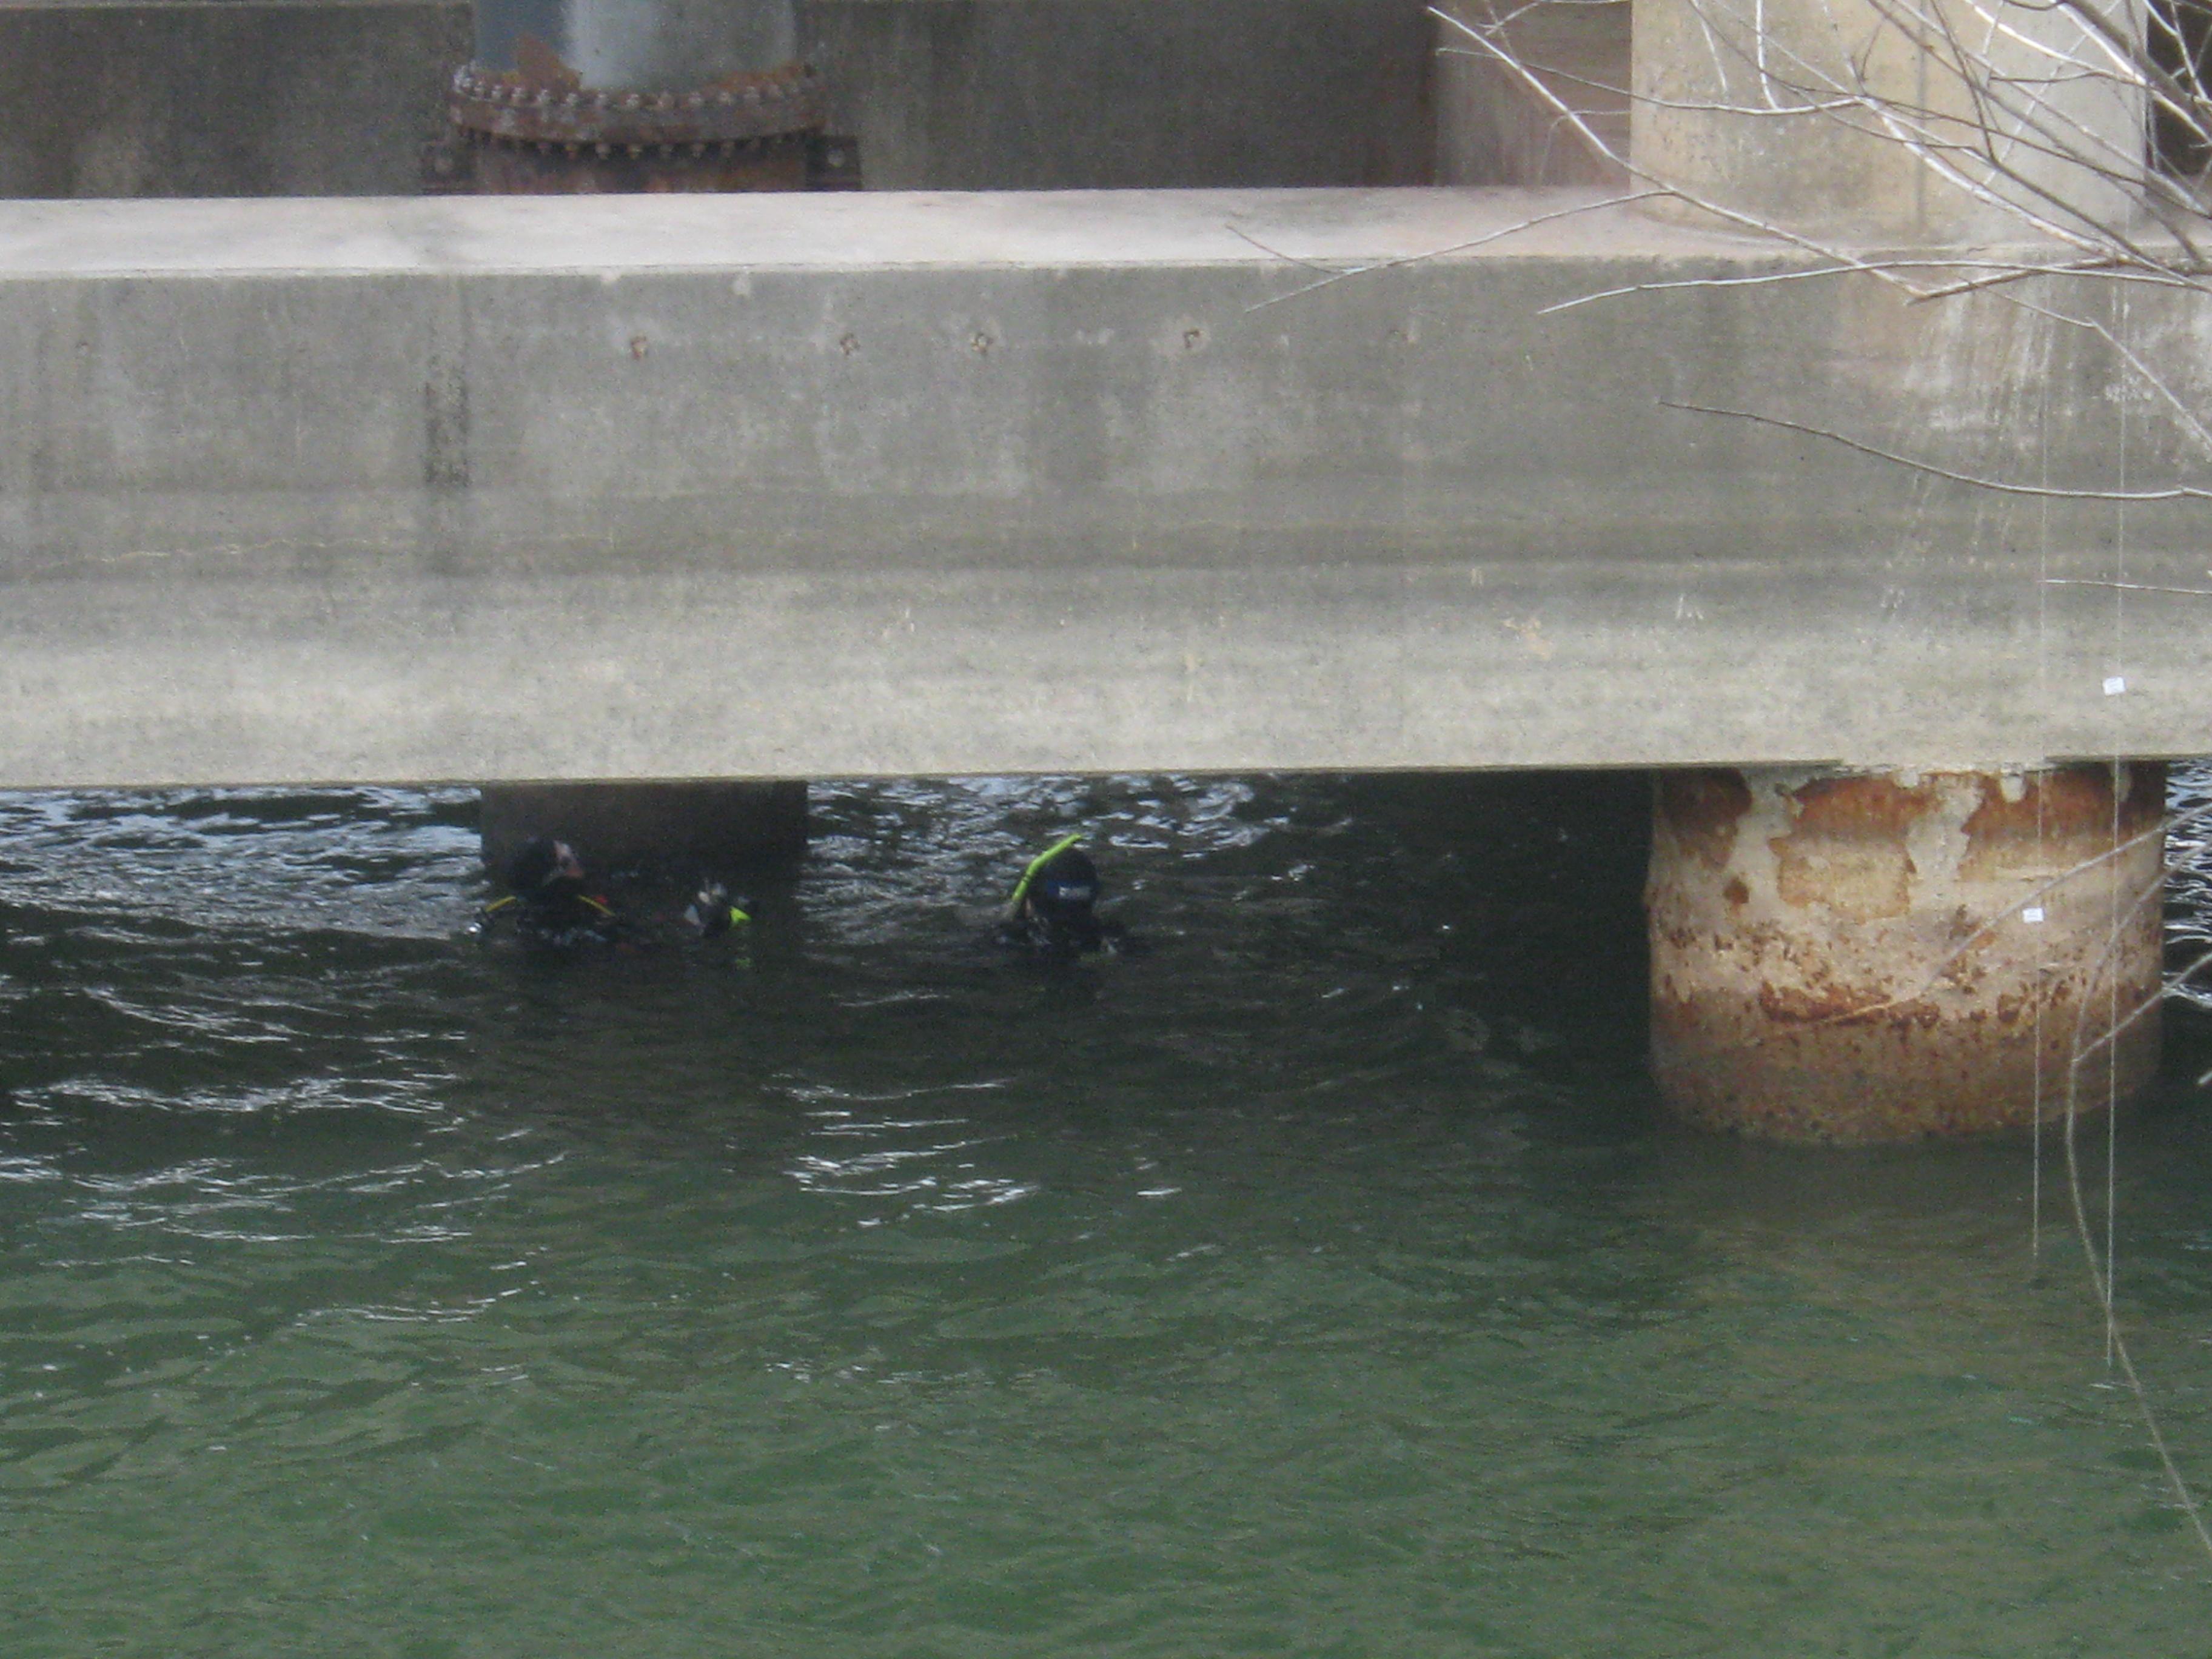 Scuba divers heads barely visible above the lake surface, under a large concrete structure